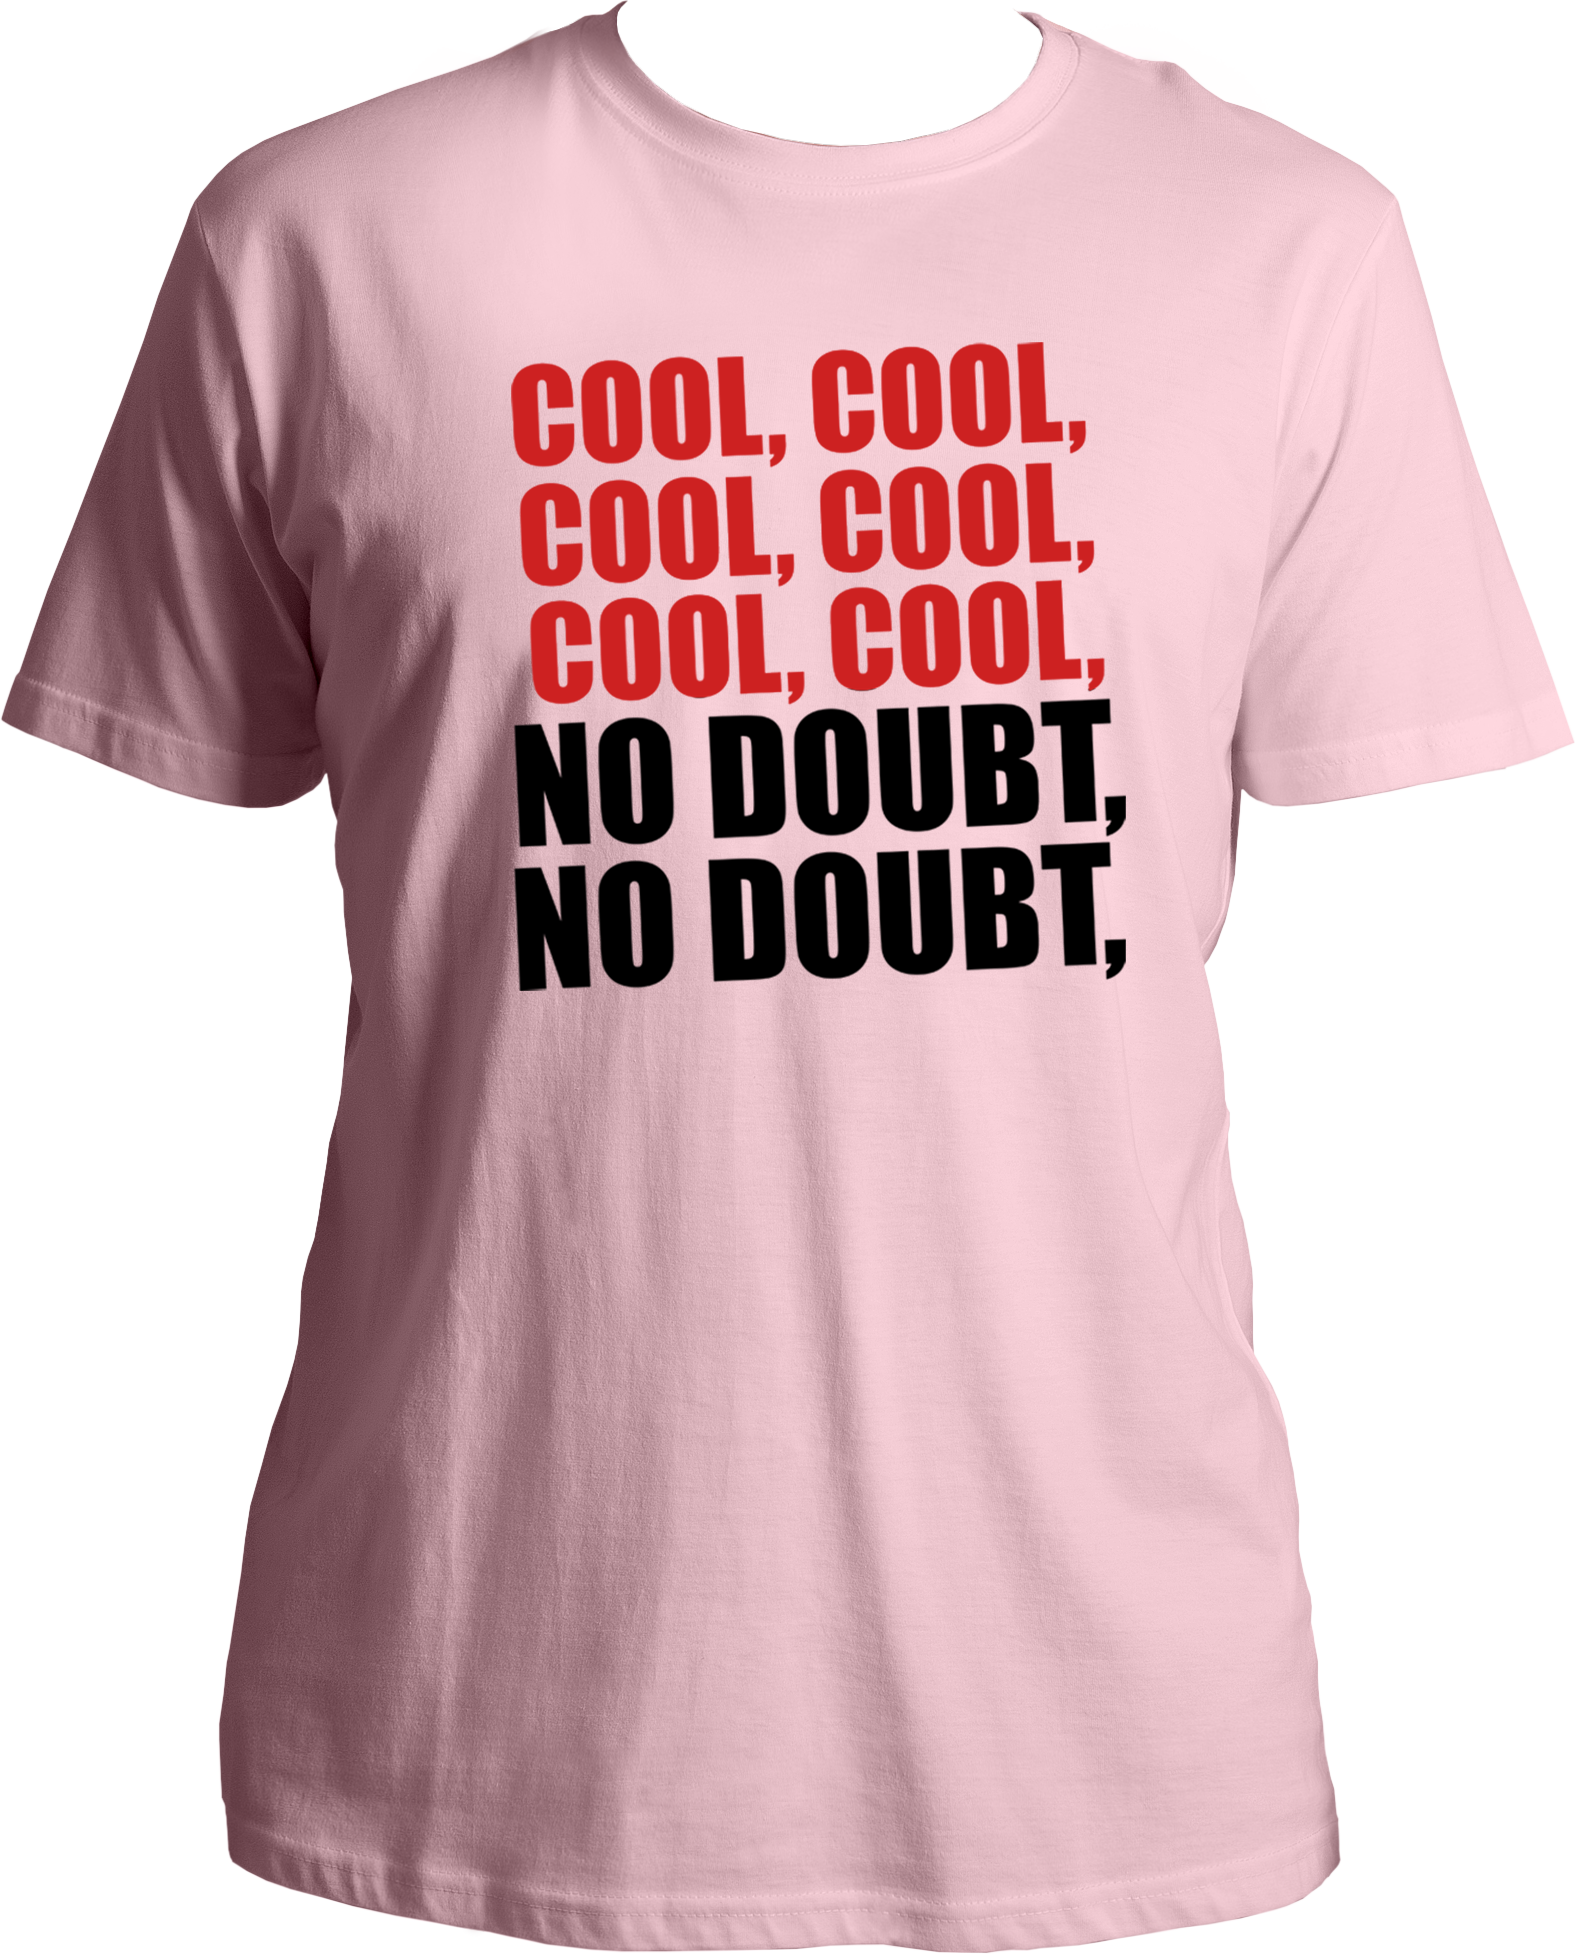 Step into the hilarious world of Brooklyn Nine-Nine with our unisex cotton T-shirt featuring the iconic "Cool, Cool, Cool, Cool, Cool, Cool, No Doubt, No Doubt" incident! This tee is not just a garment; it's a piece of comedy gold that only true fans will appreciate.